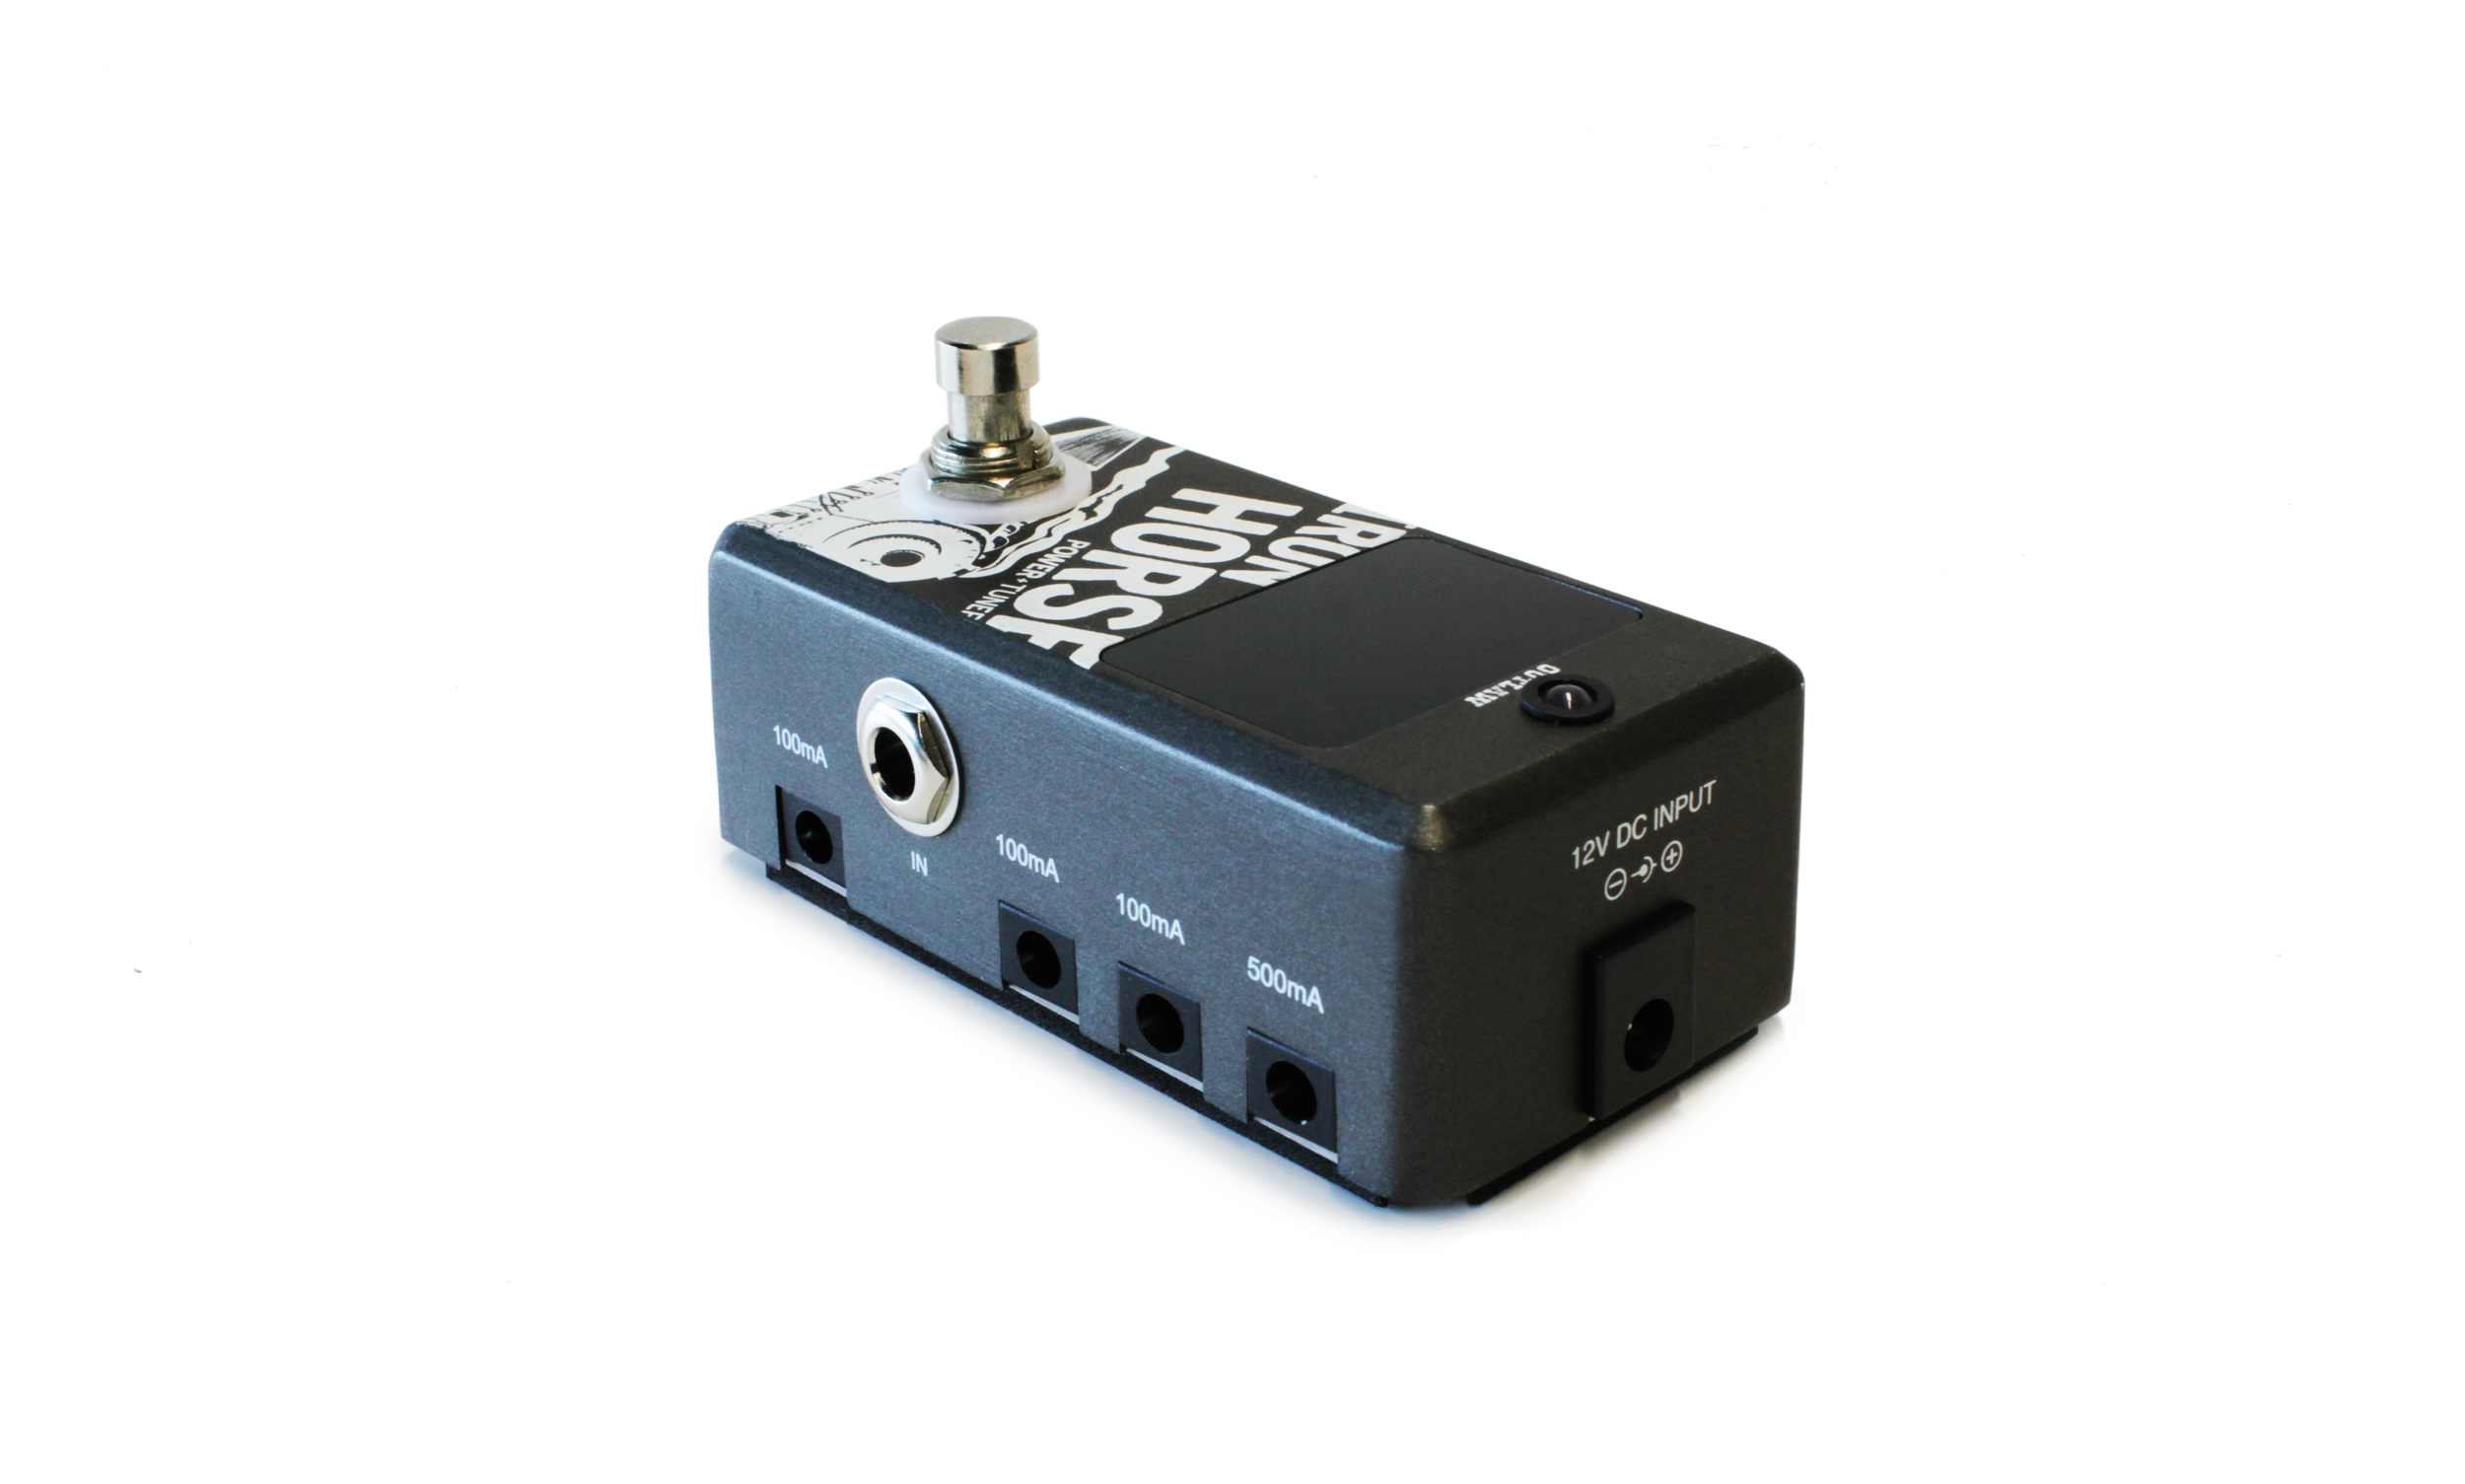 Iron Horse Power Supply + Tuner — Outlaw Effects